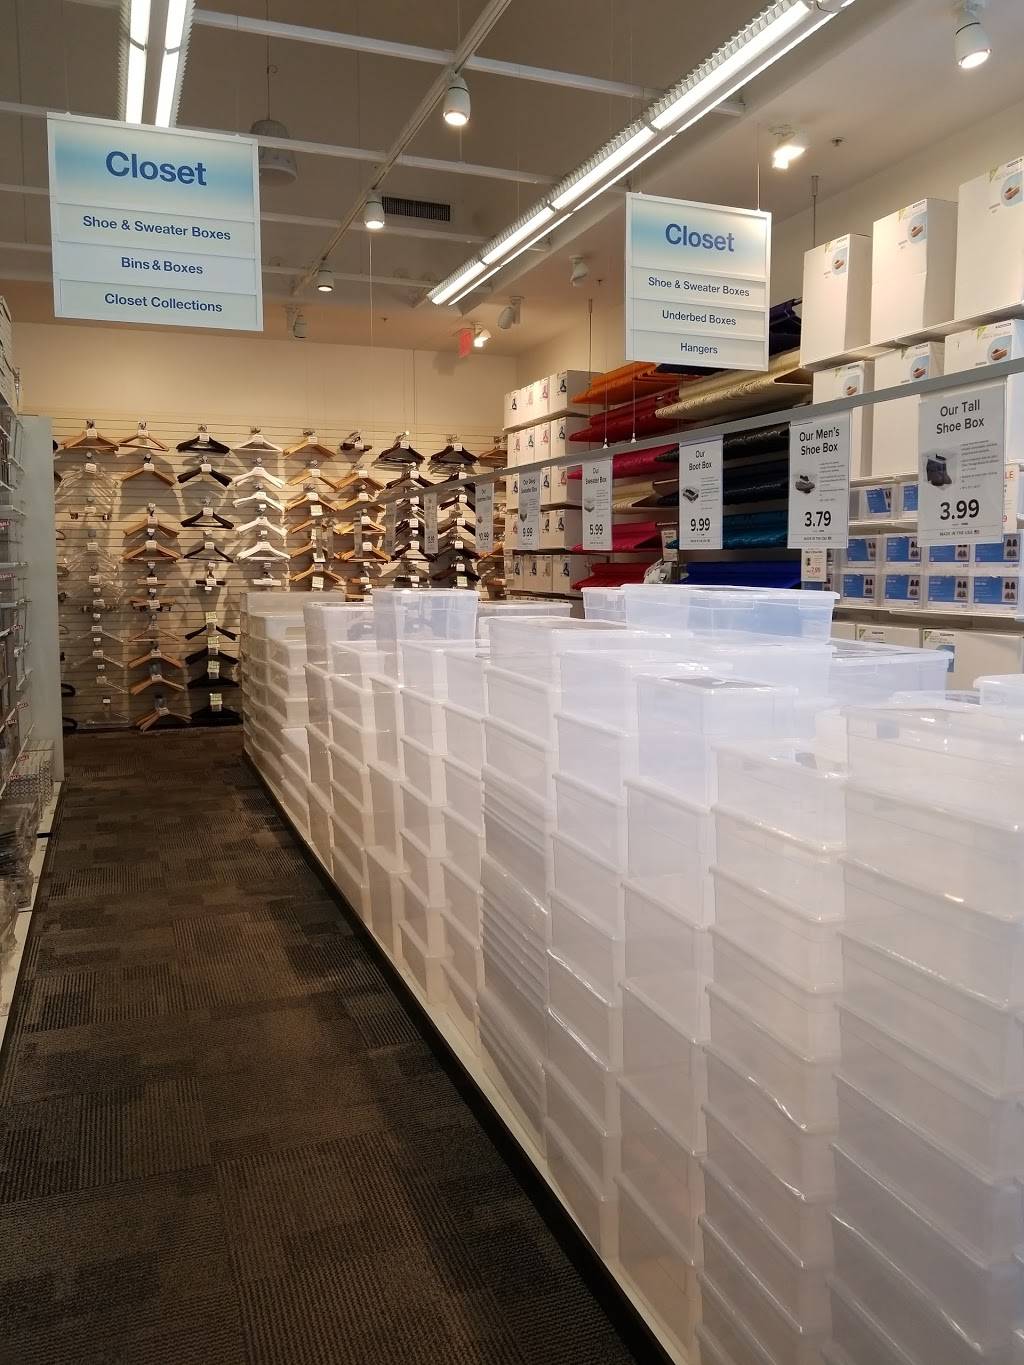 The Container Store | 18550 N Scottsdale Rd, Phoenix, AZ 85054, USA | Phone: (480) 563-7611